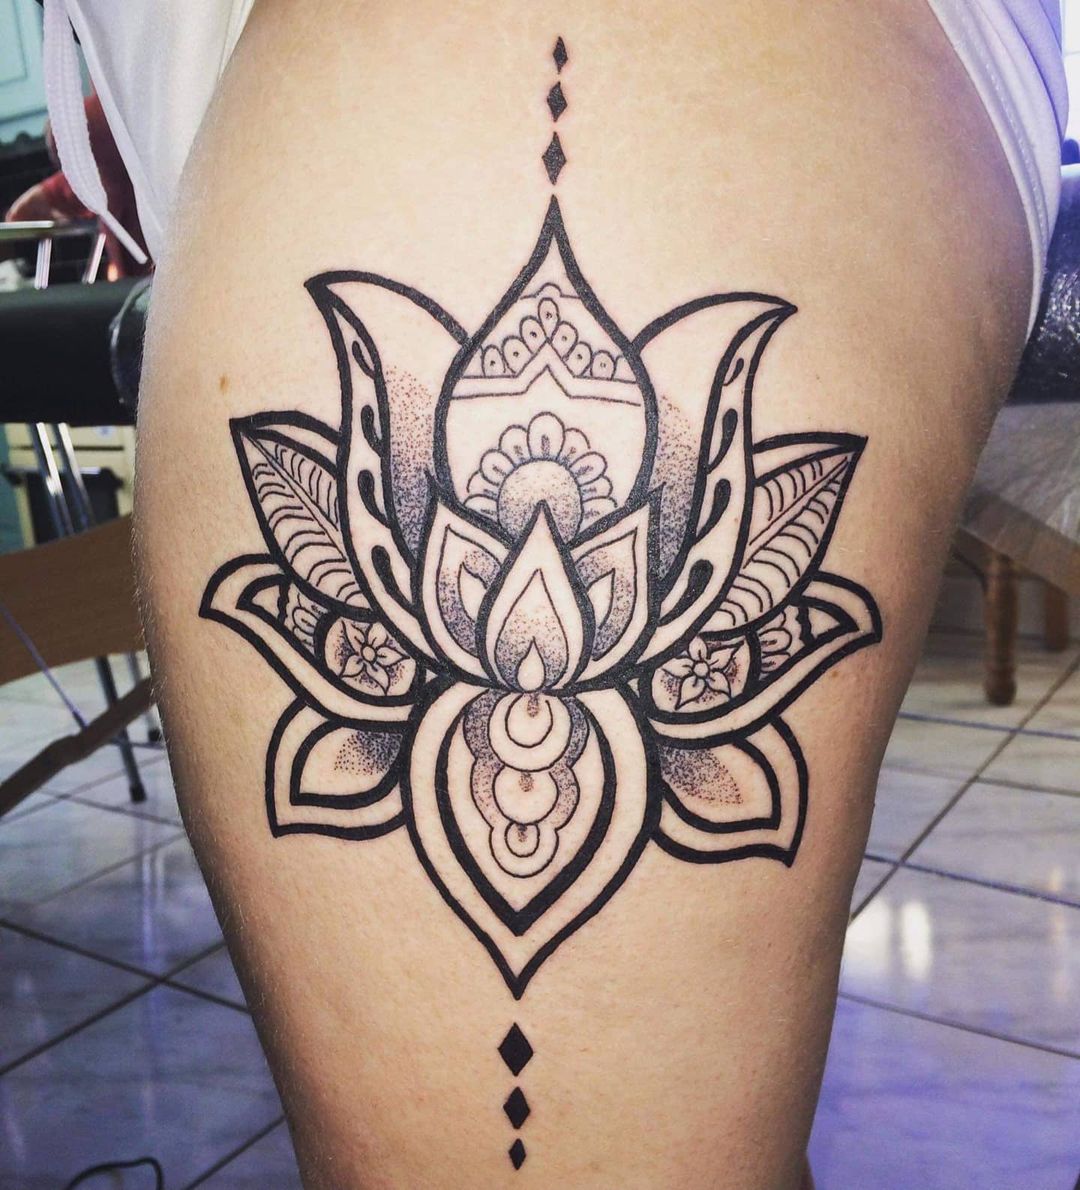 26 Lotus Flower Tattoo Designs And Meanings  Peaceful Hacks